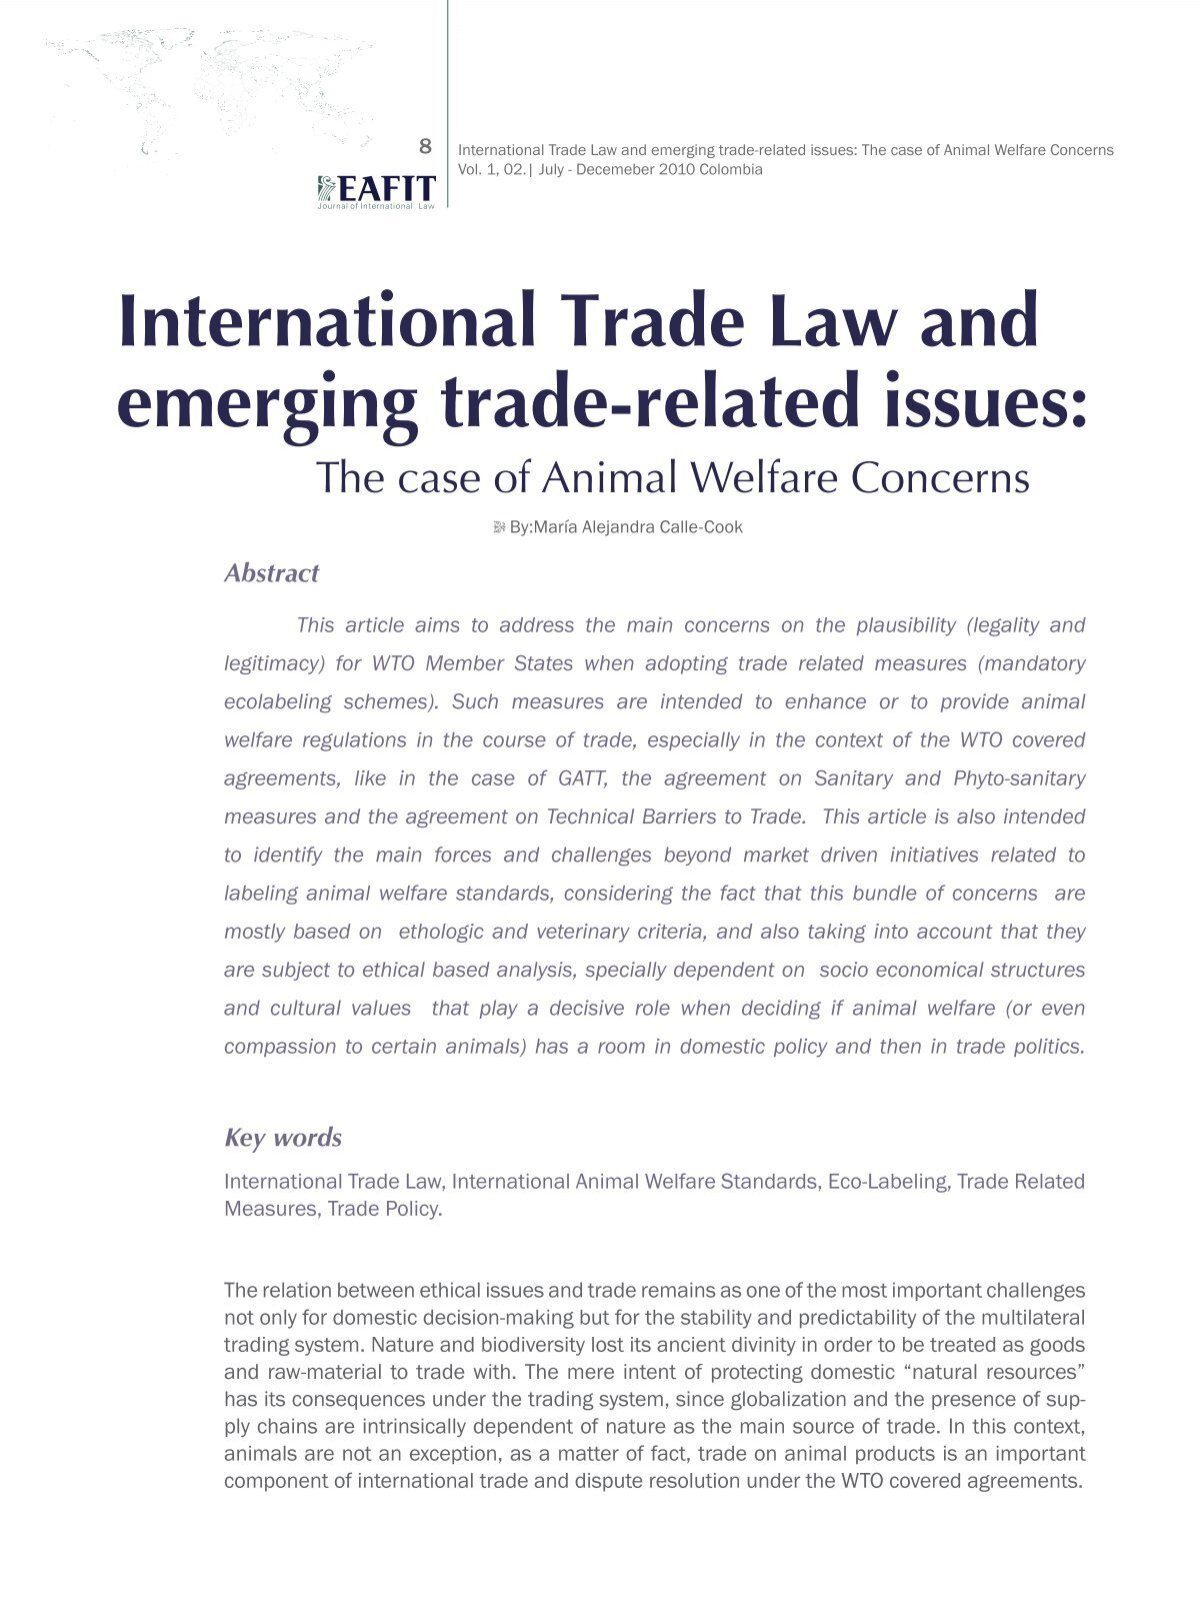 international trade law research paper